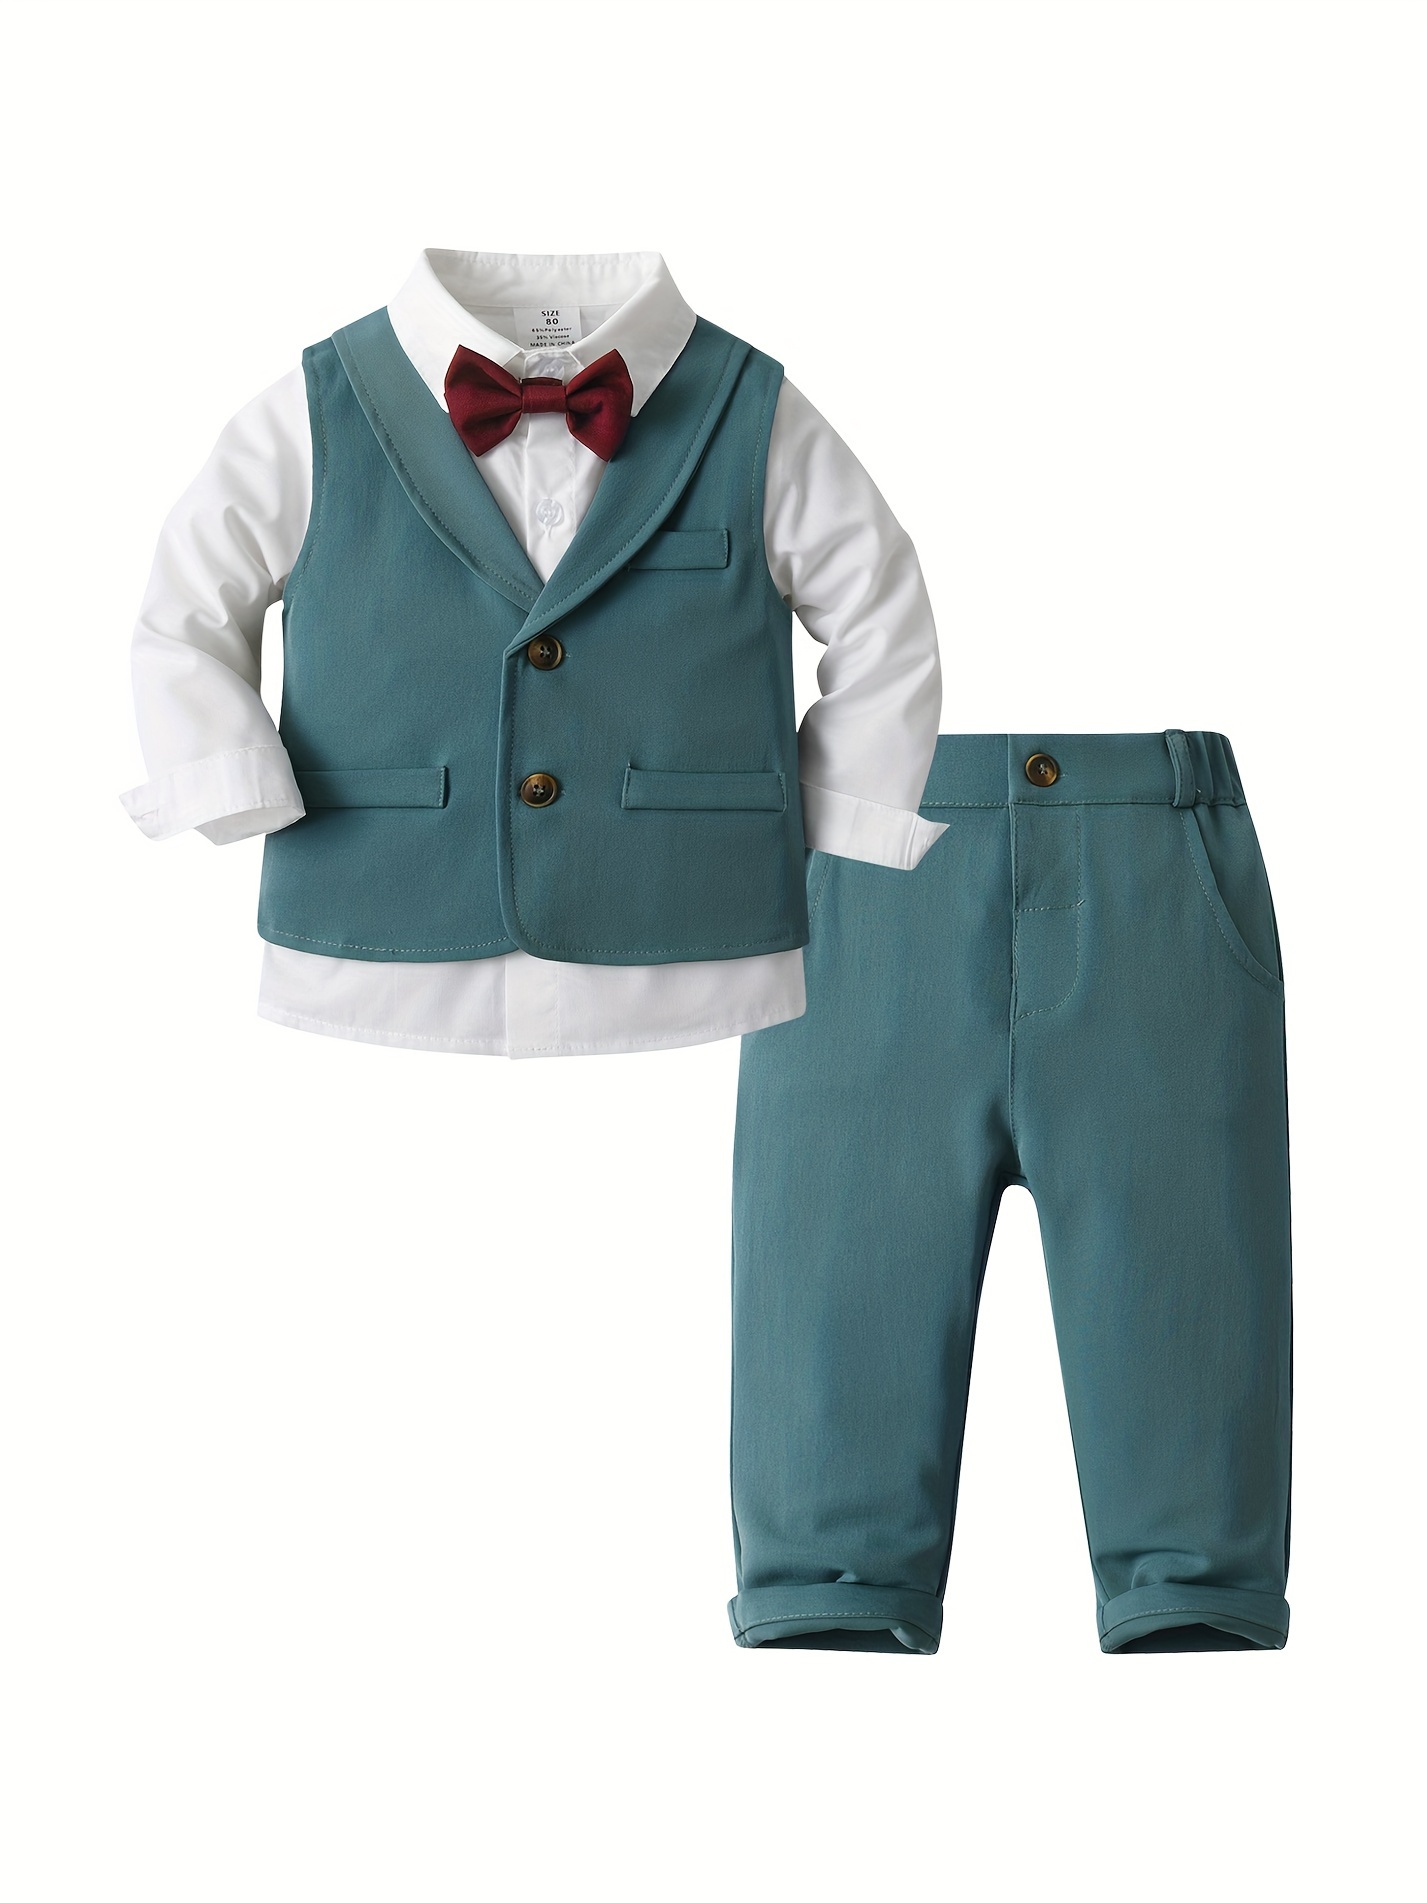 NEW 4Pcs Toddler Boy Kids Formal Short Suit Wedding Party Outfits